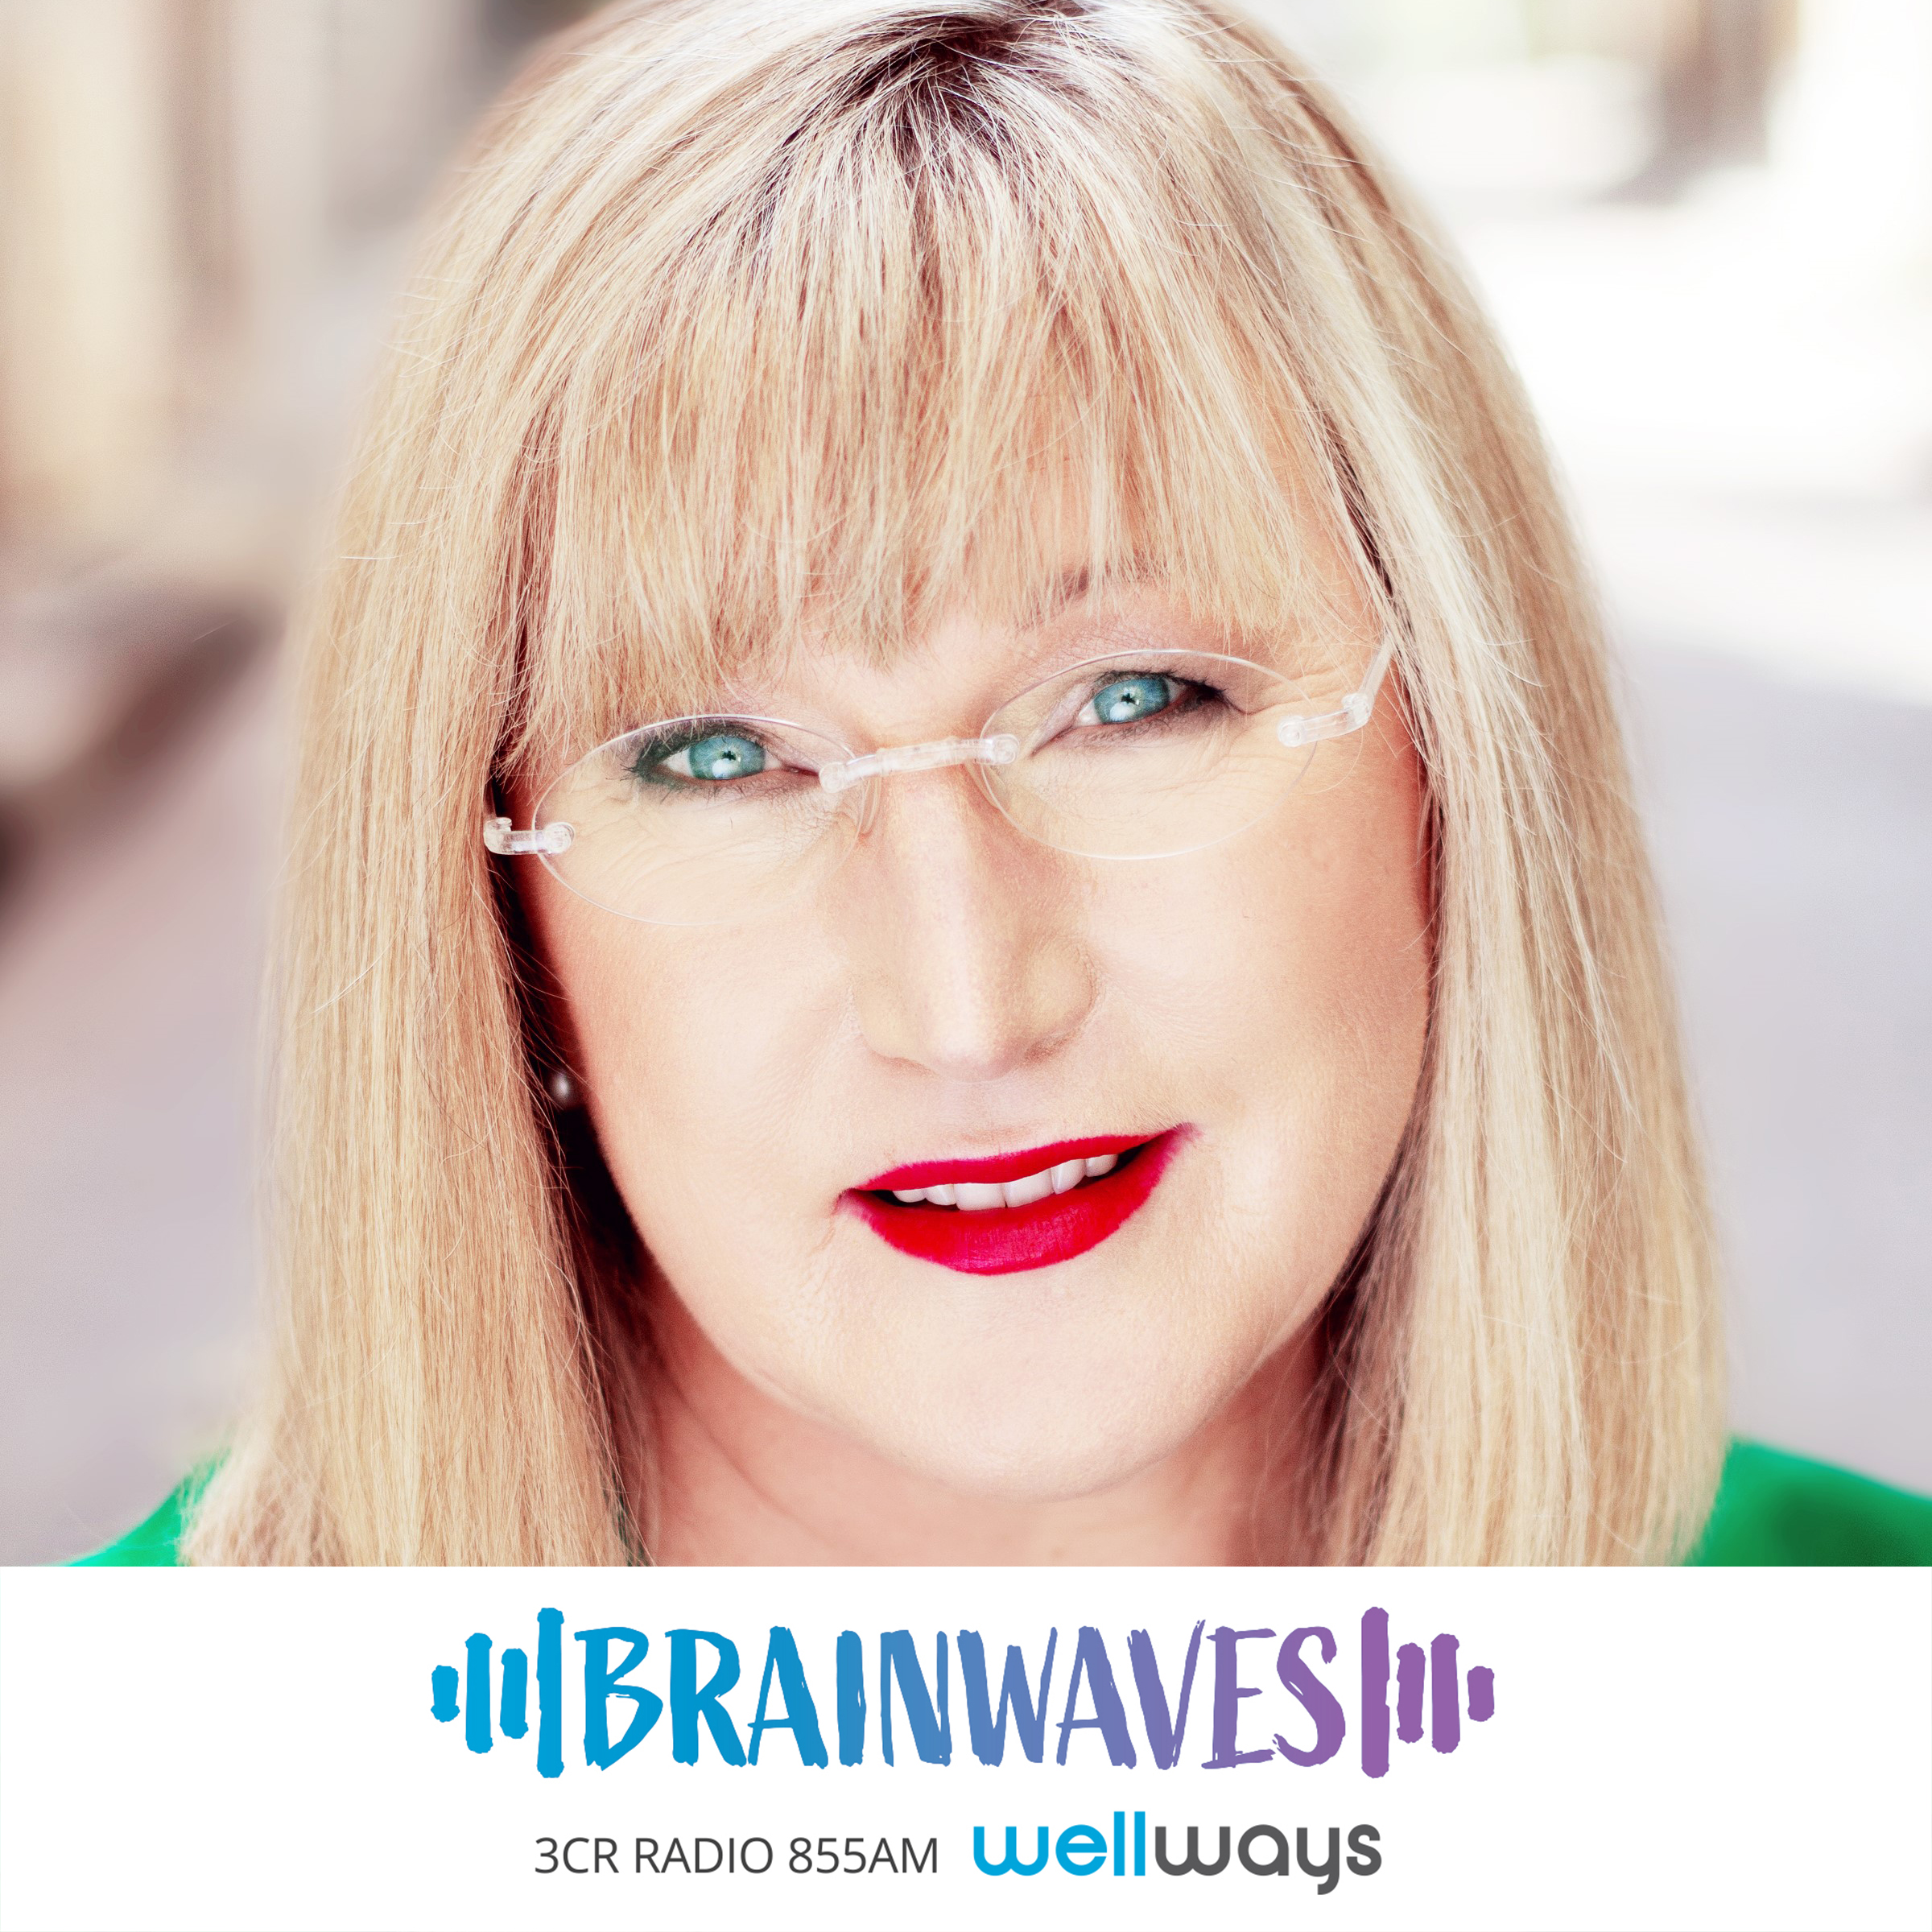 Donna Ciccia is a caucasian woman with shoulder length straight blonde hair, she is wear glasses and a green top, she smiles at the camera with red lipstick on. The Brainwaves logo is in blue and purple underneath Donna's headshot. She is on Brainwaves on 3CR 855am Melbourne to discuss Long Covid and Mental Health from a lived experience lens.